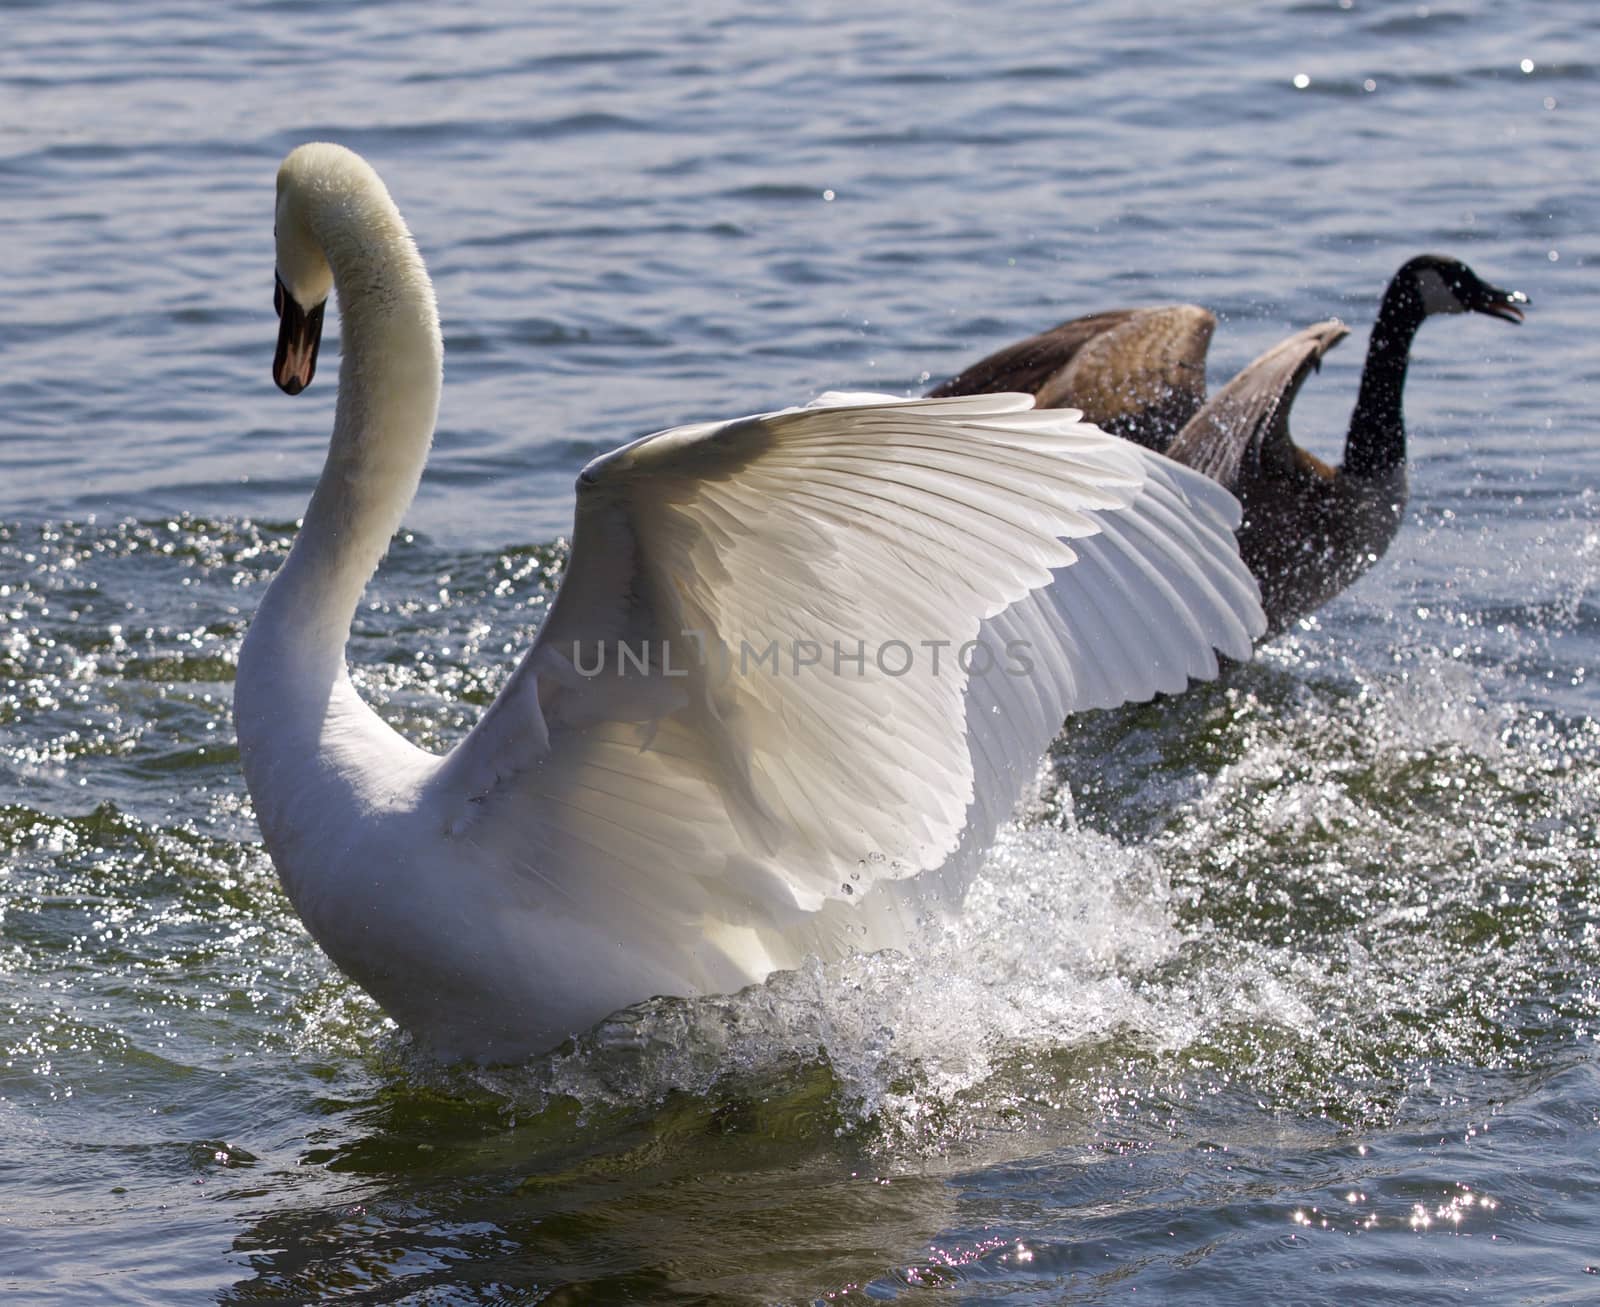 Fantastic contest between the powerful swan and the brave Canada goose by teo